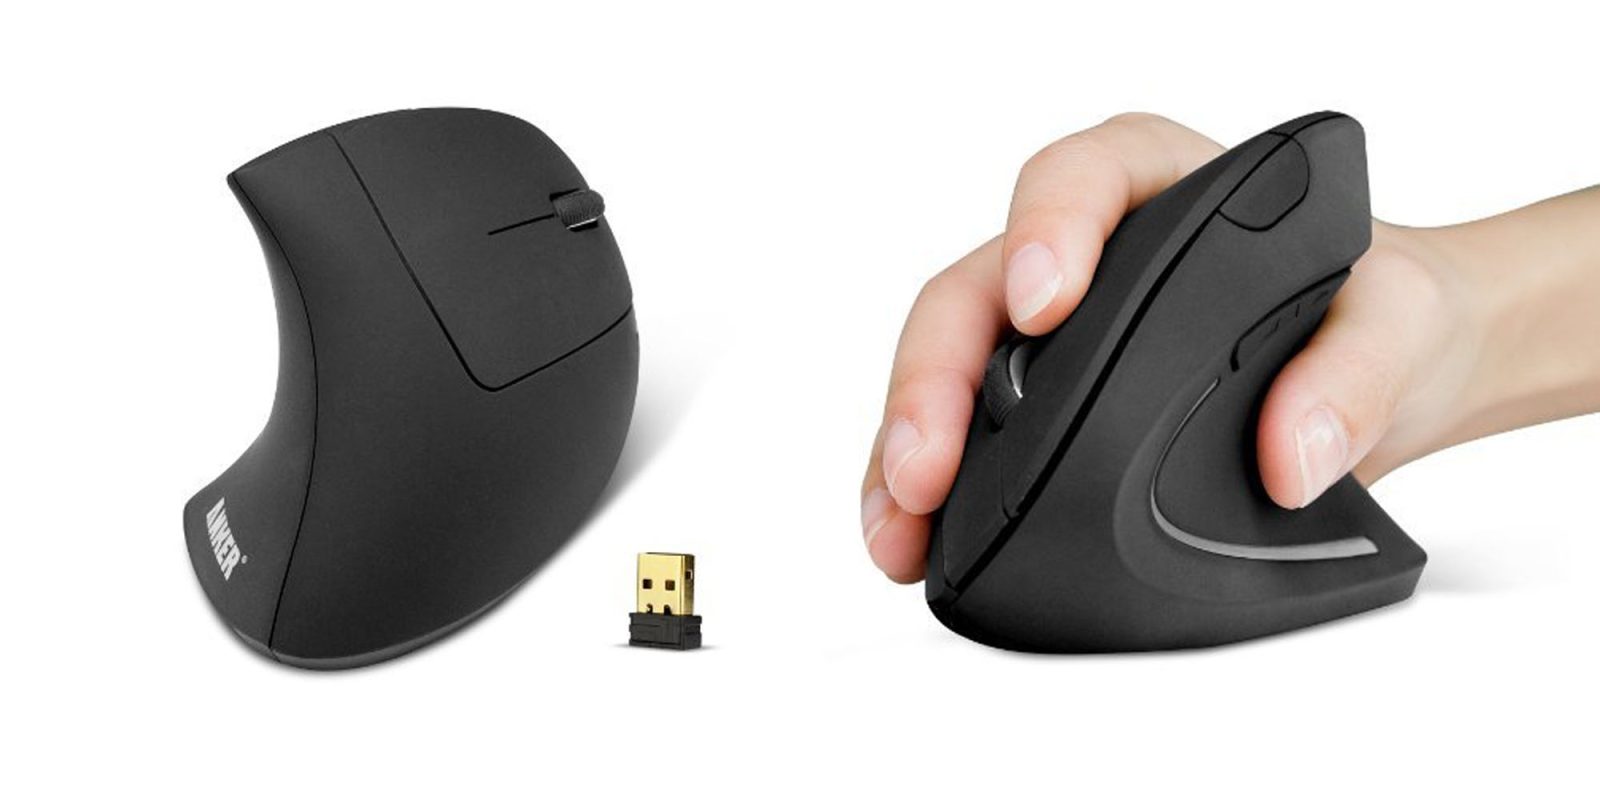 Anker's Wireless Vertical Ergonomic Mouse is now at $15 (Reg. $20